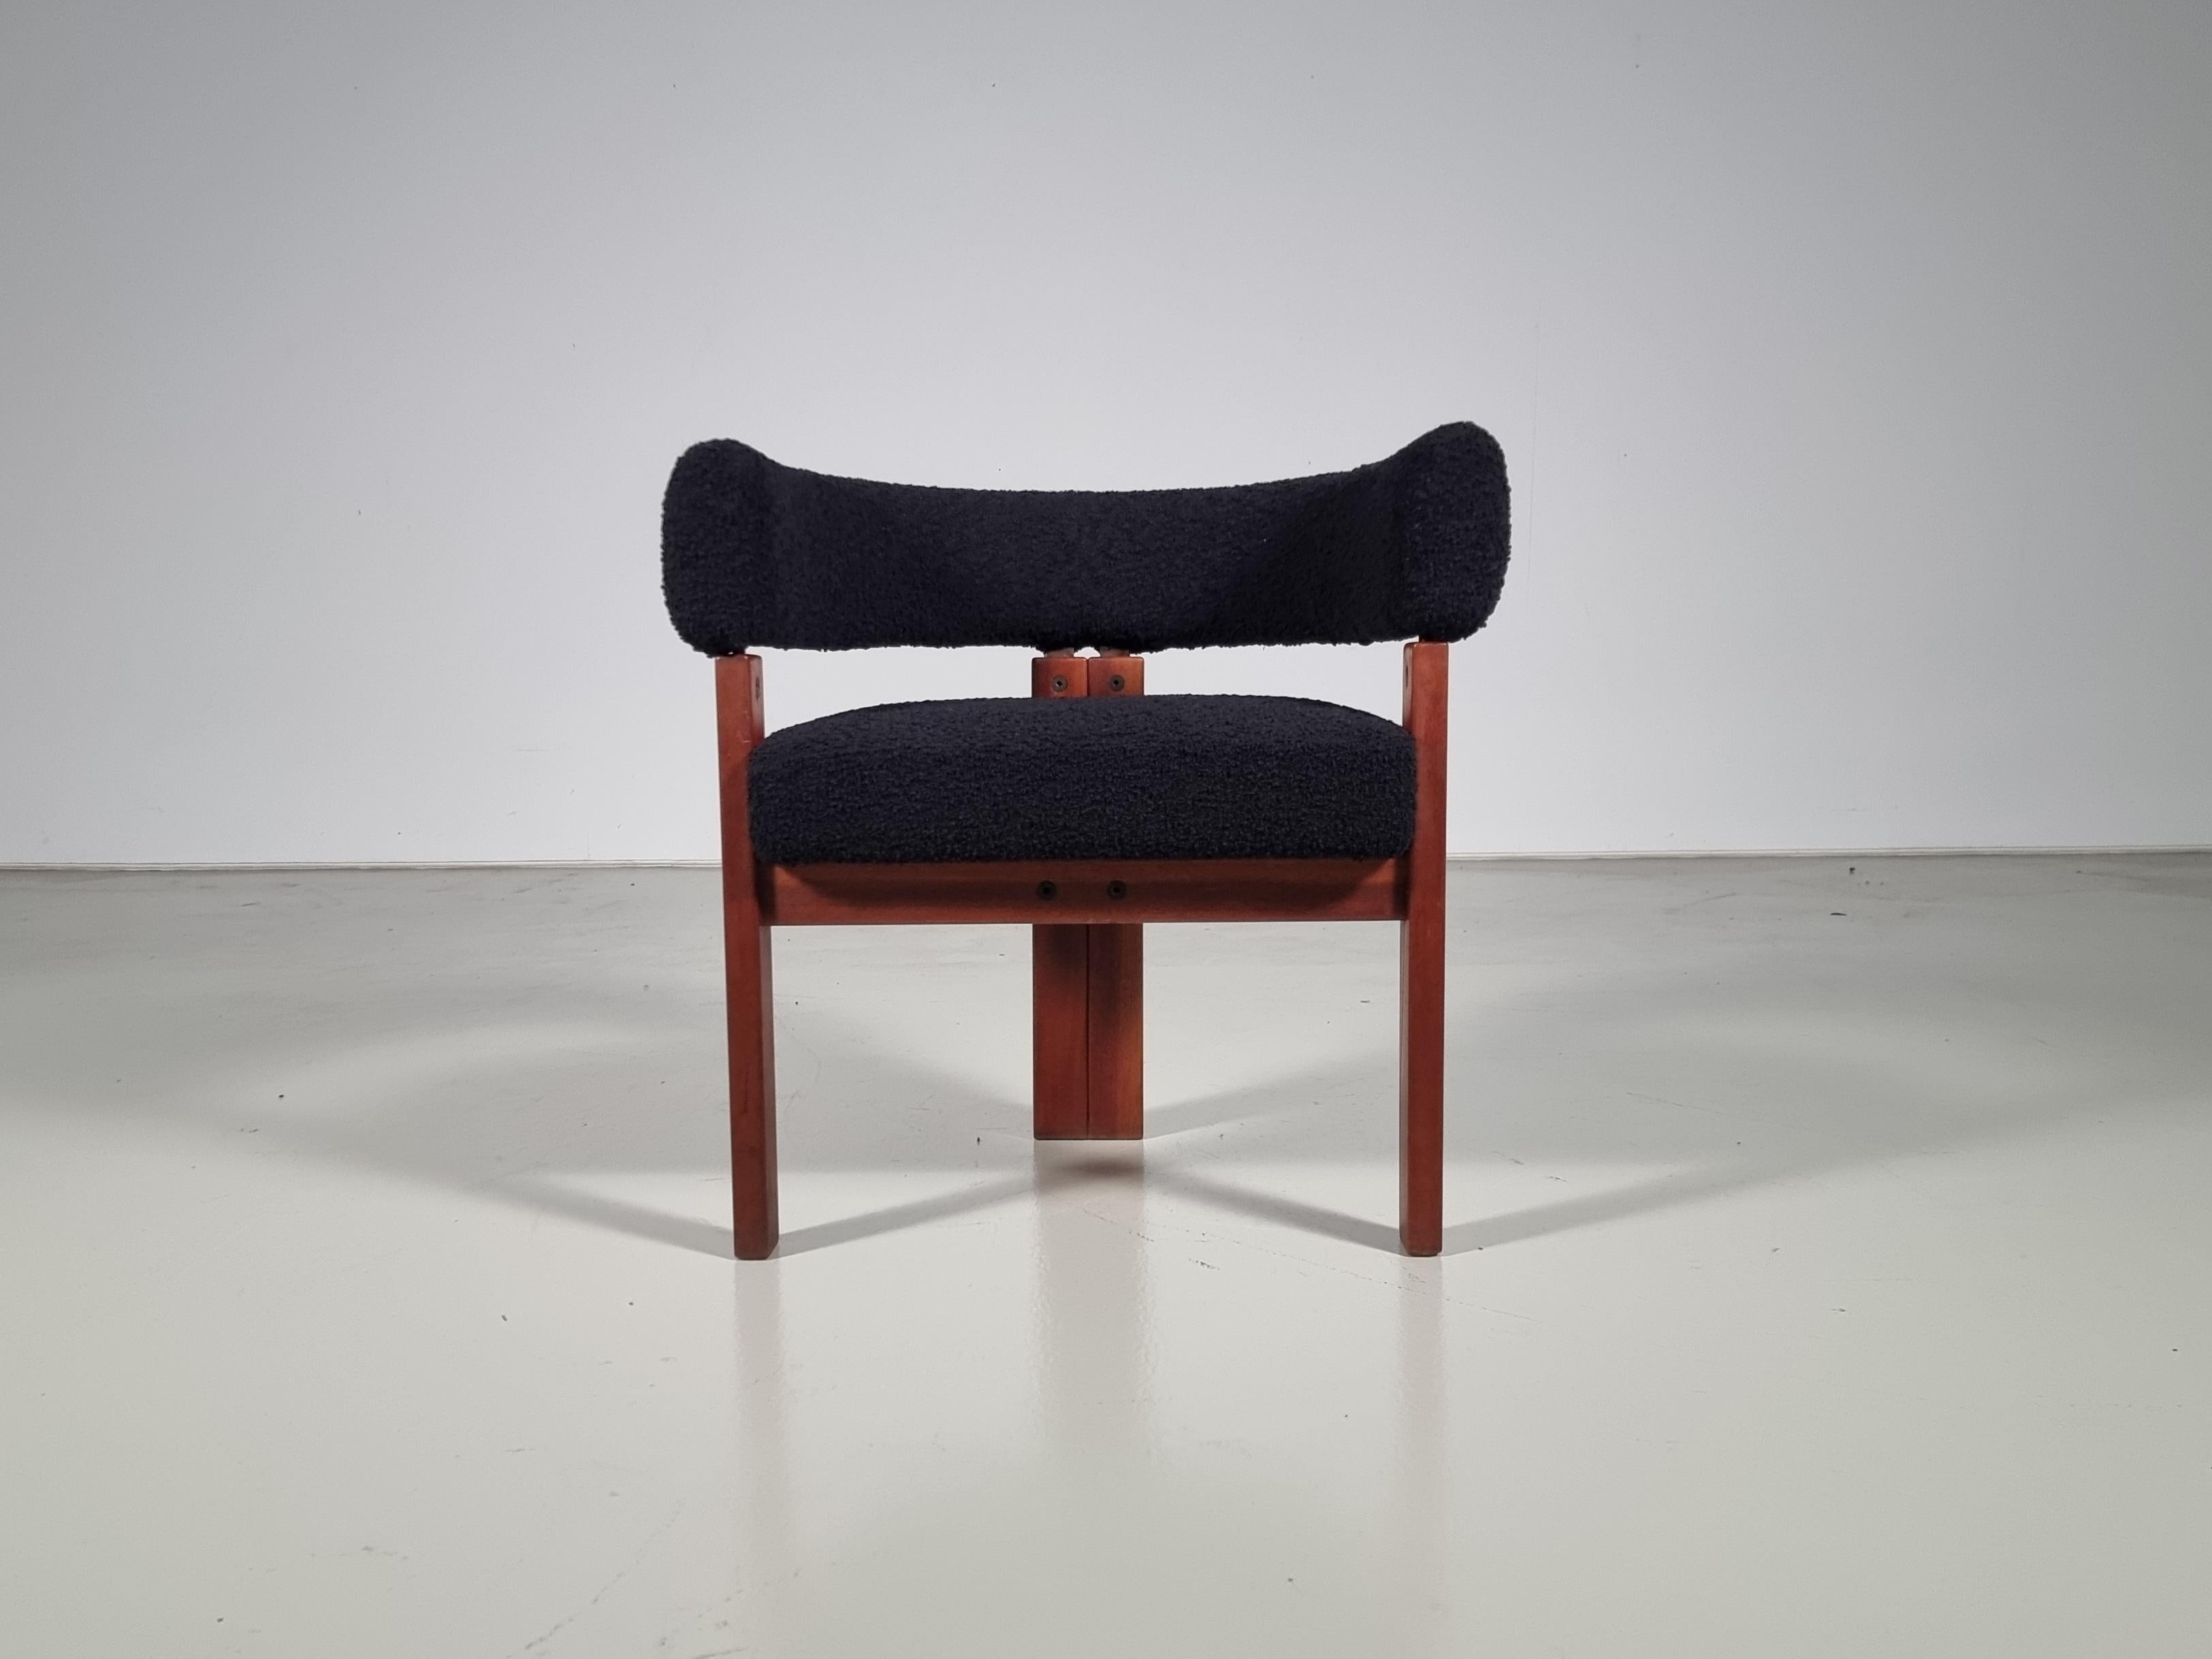 European Set of 8 Chairs in teak and black boucle by Ettore Sottsass for Poltronova, 1960